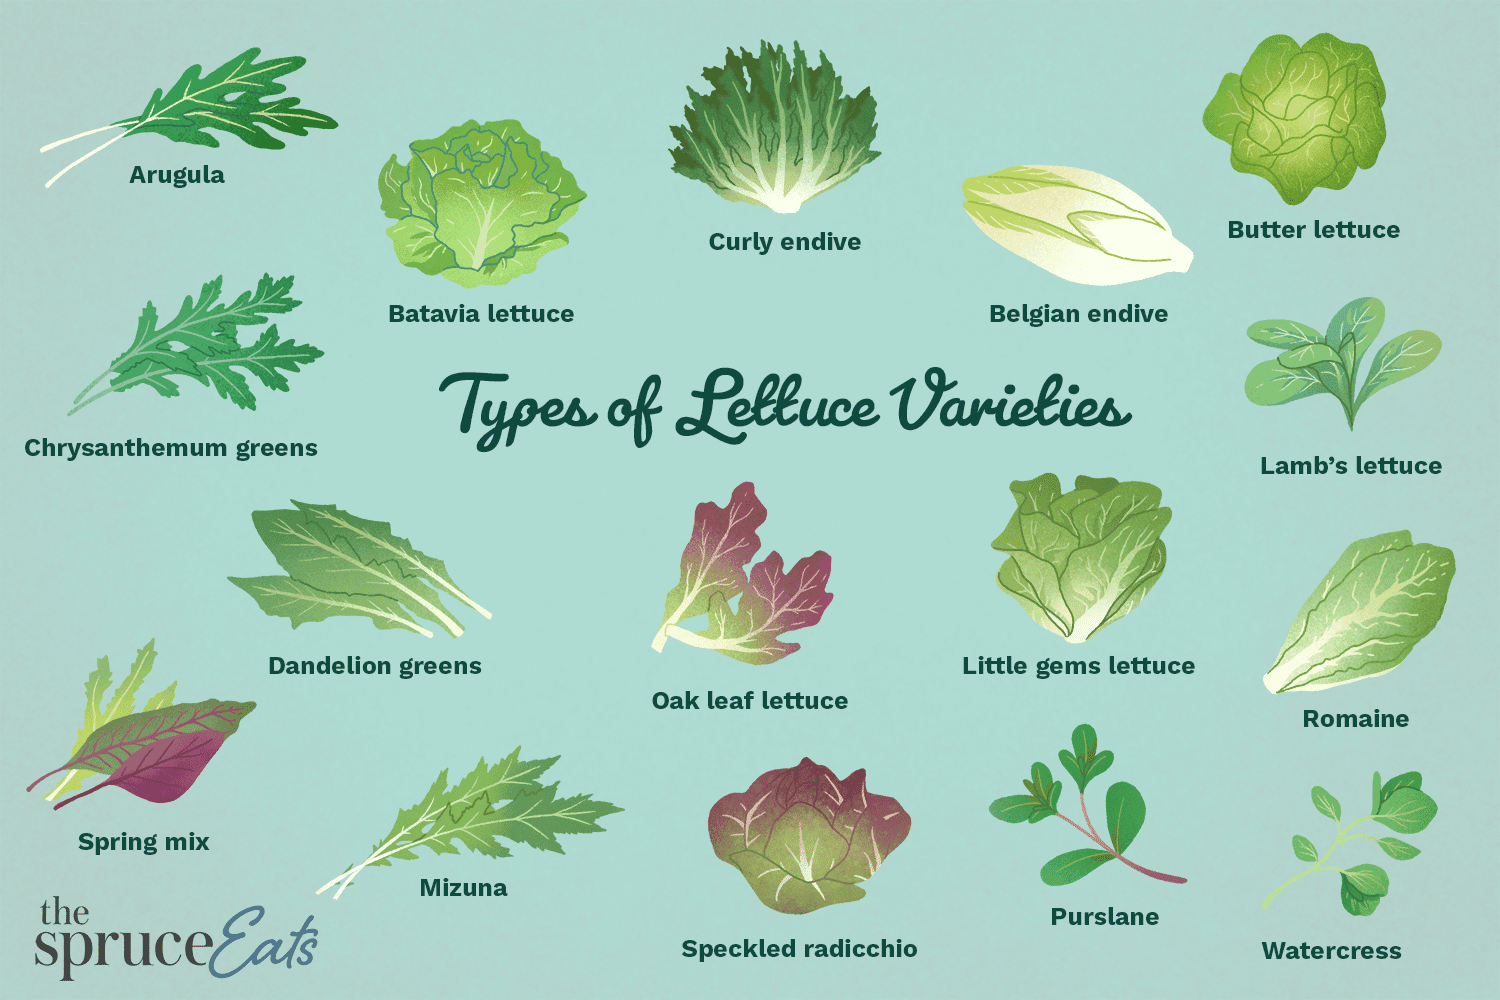 4-most-famous-types-and-varieties-of-lettuce-complete-gardering